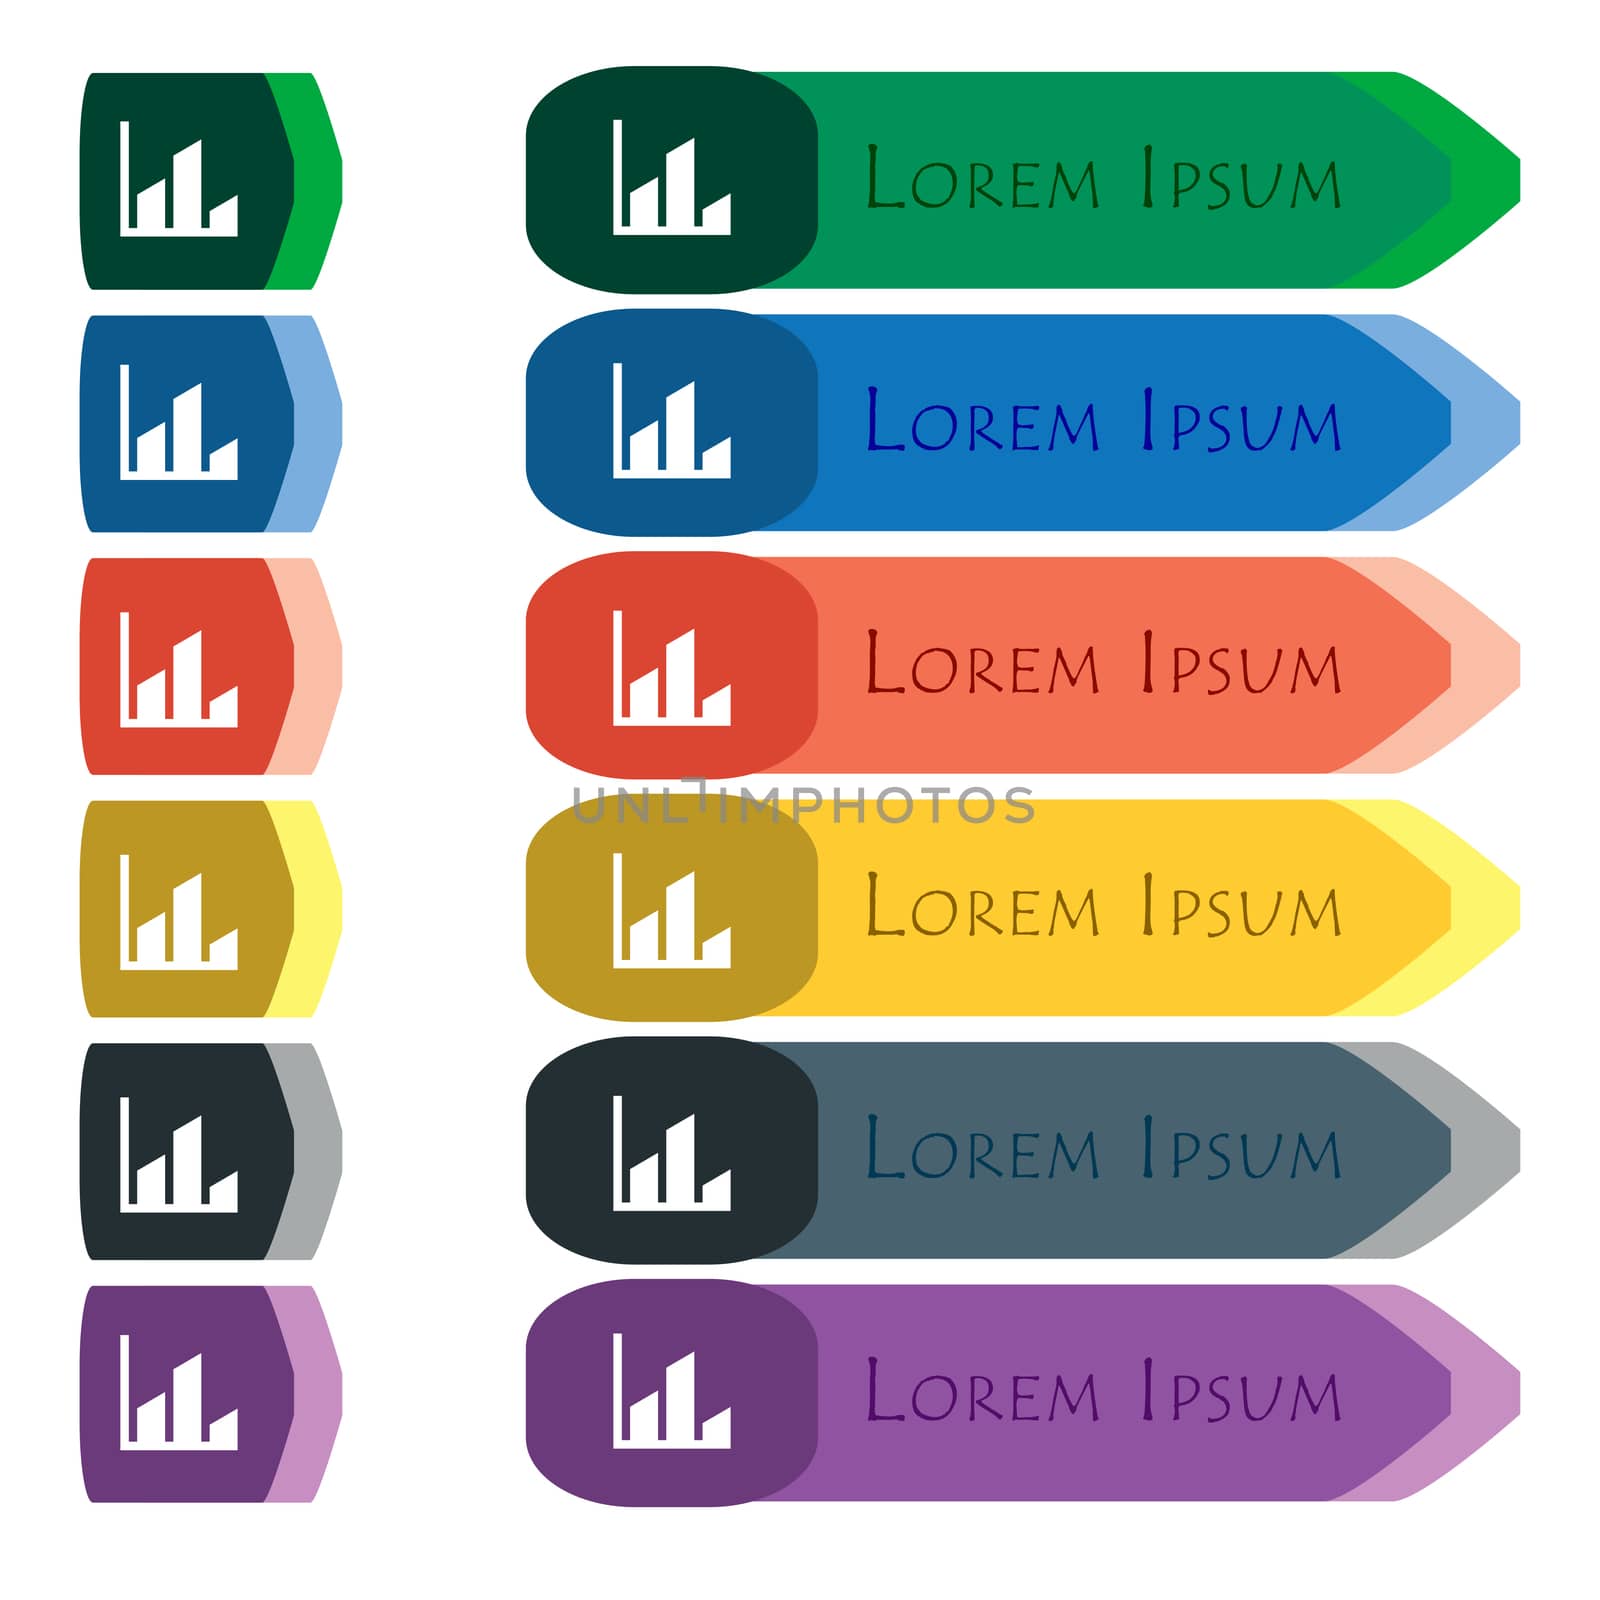 Chart icon sign. Set of colorful, bright long buttons with additional small modules. Flat design. 